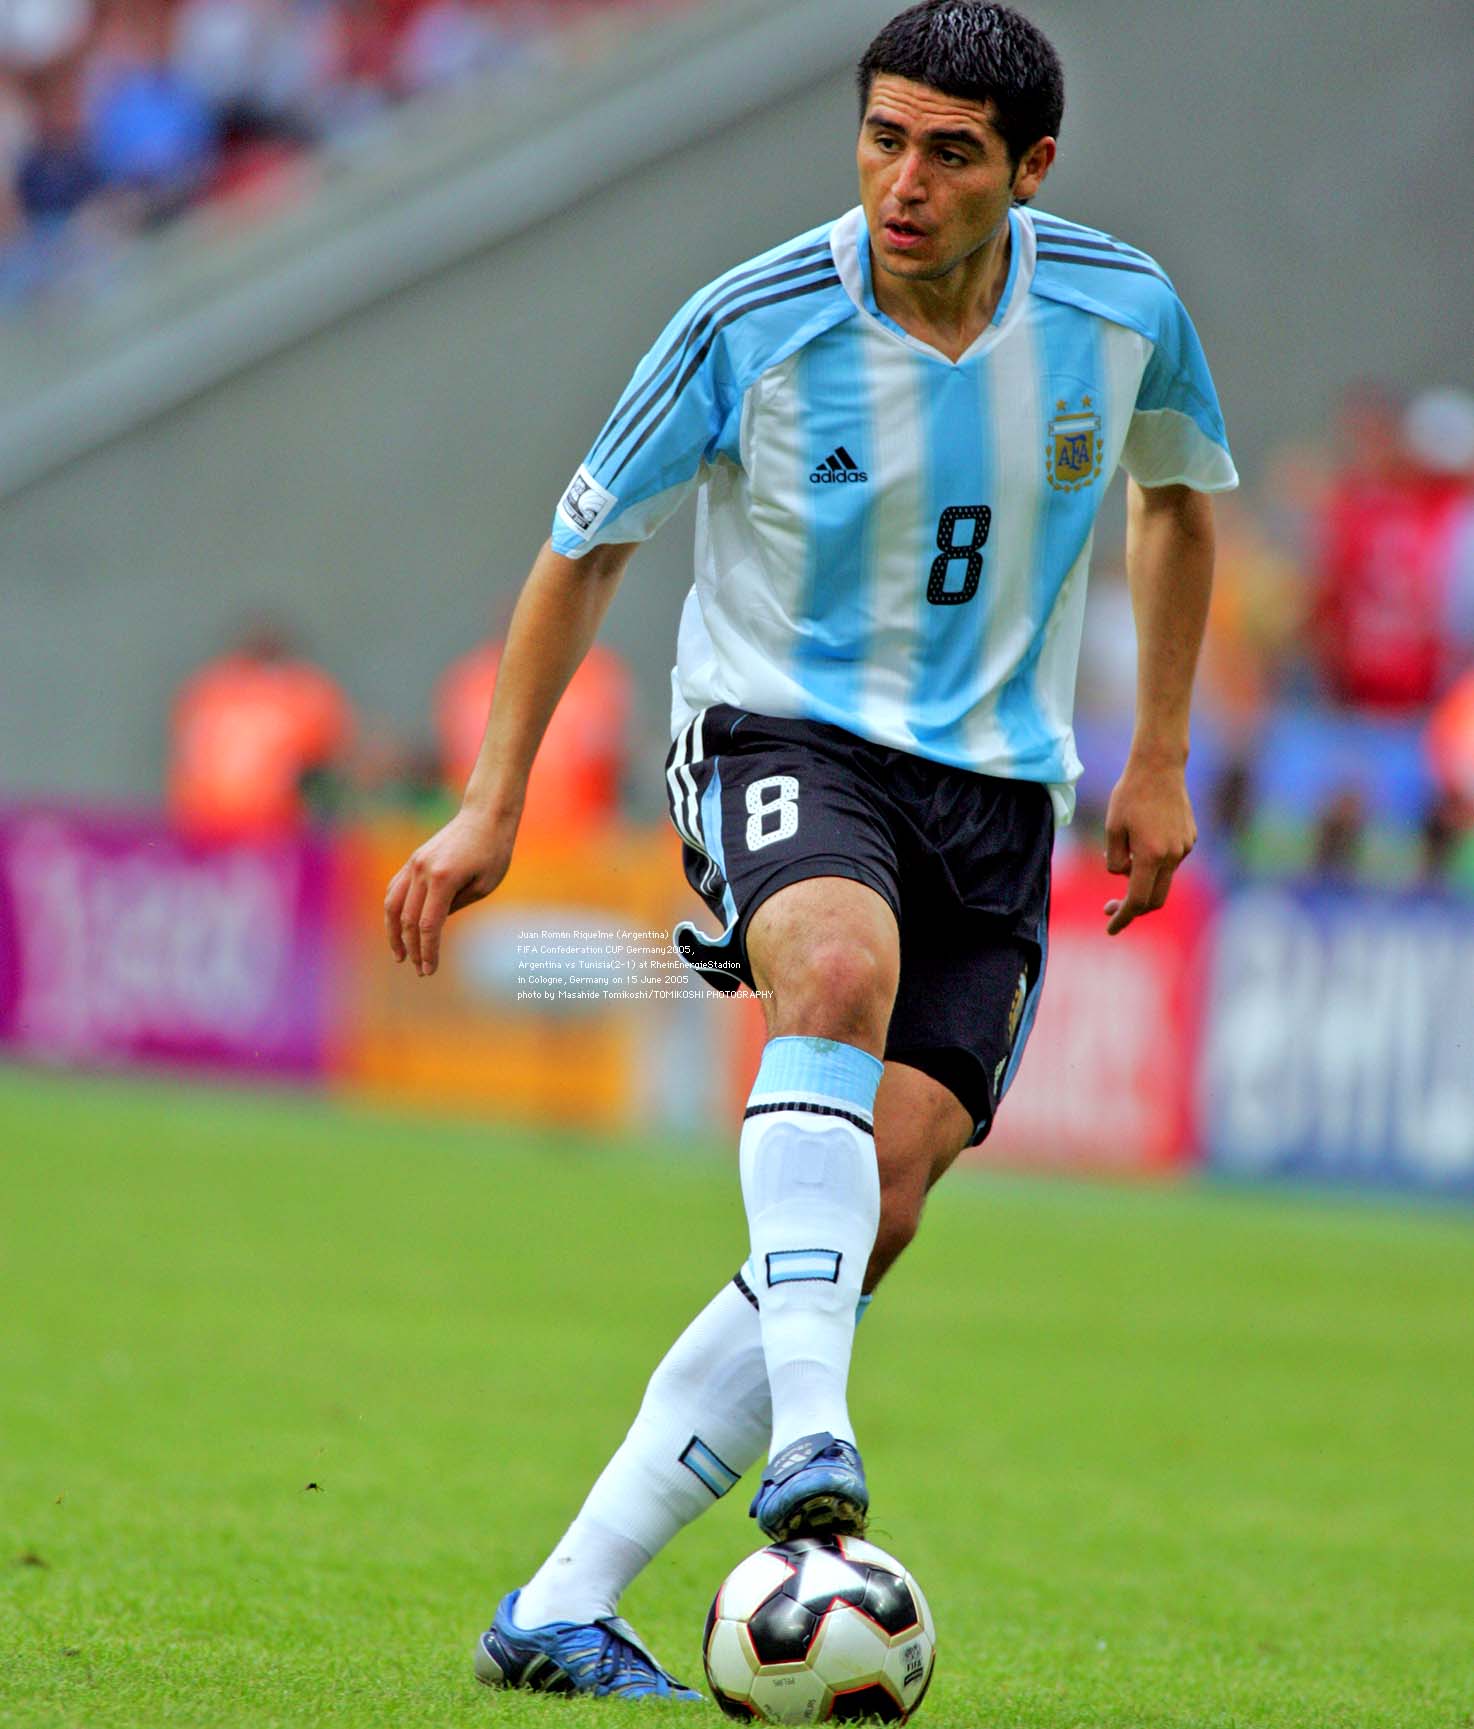 tphoto on Twitter: "Juan Román Riquelme (Argentina) on ball FIFA  Confederation CUP Germany2005, Argentina vs Tunisia(2-1) at  RheinEnergieStadion in Cologne, Germany on 15 June 2005 photo by Masahide  Tomikoshi/TOMIKOSHI PHOTOGRAPHY https://t.co ...